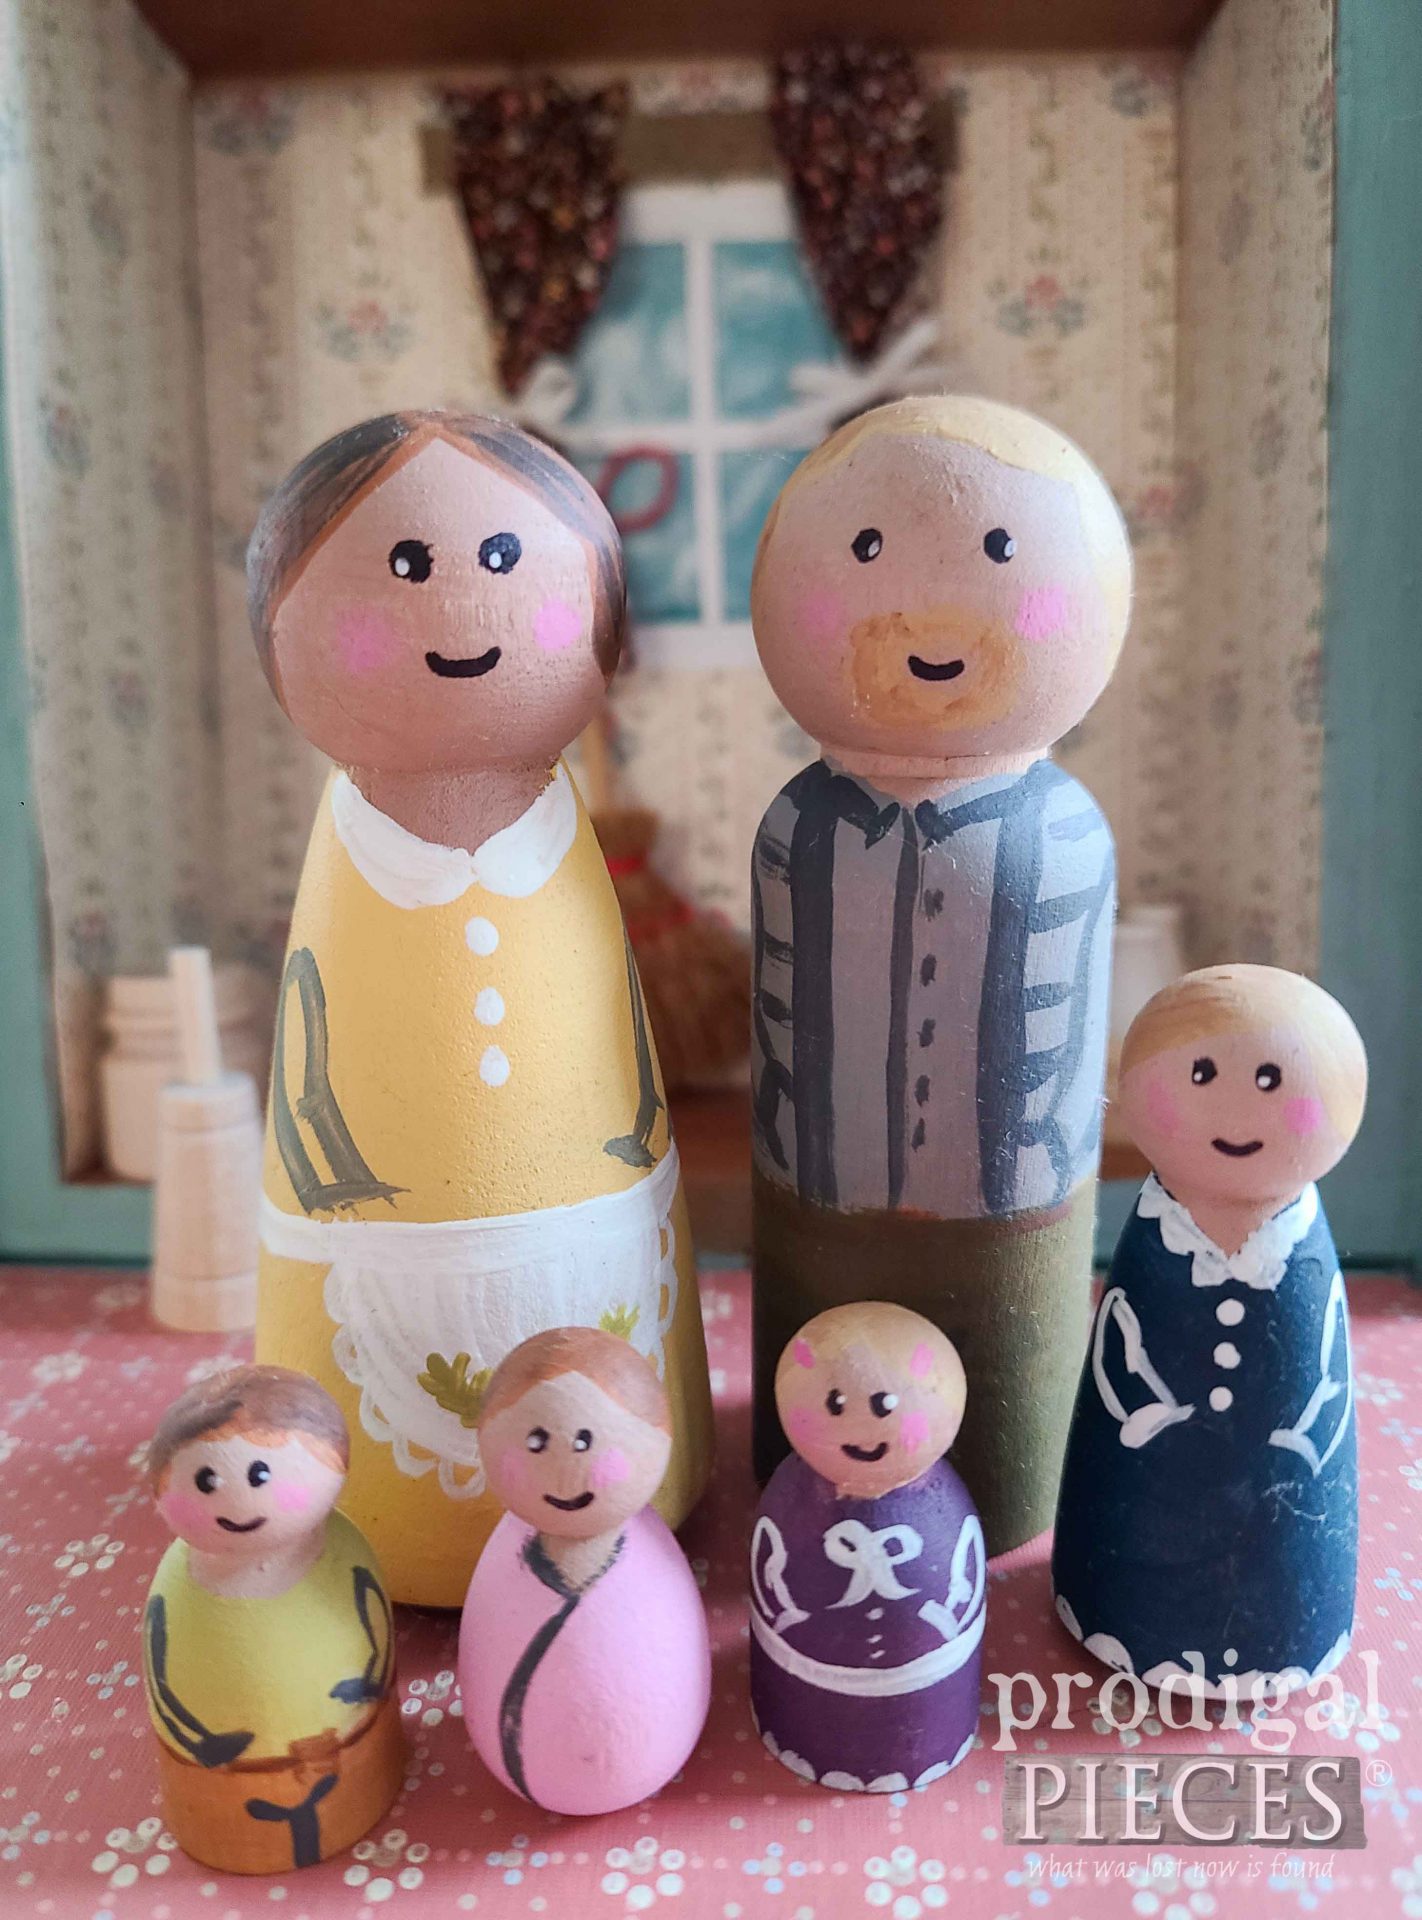 Hand-Painted Prairie Dollhouse Peg Doll Family by Larissa of Prodigal Pieces | prodigalpieces.com #prodigalpieces #handmade #doll #toys #kids